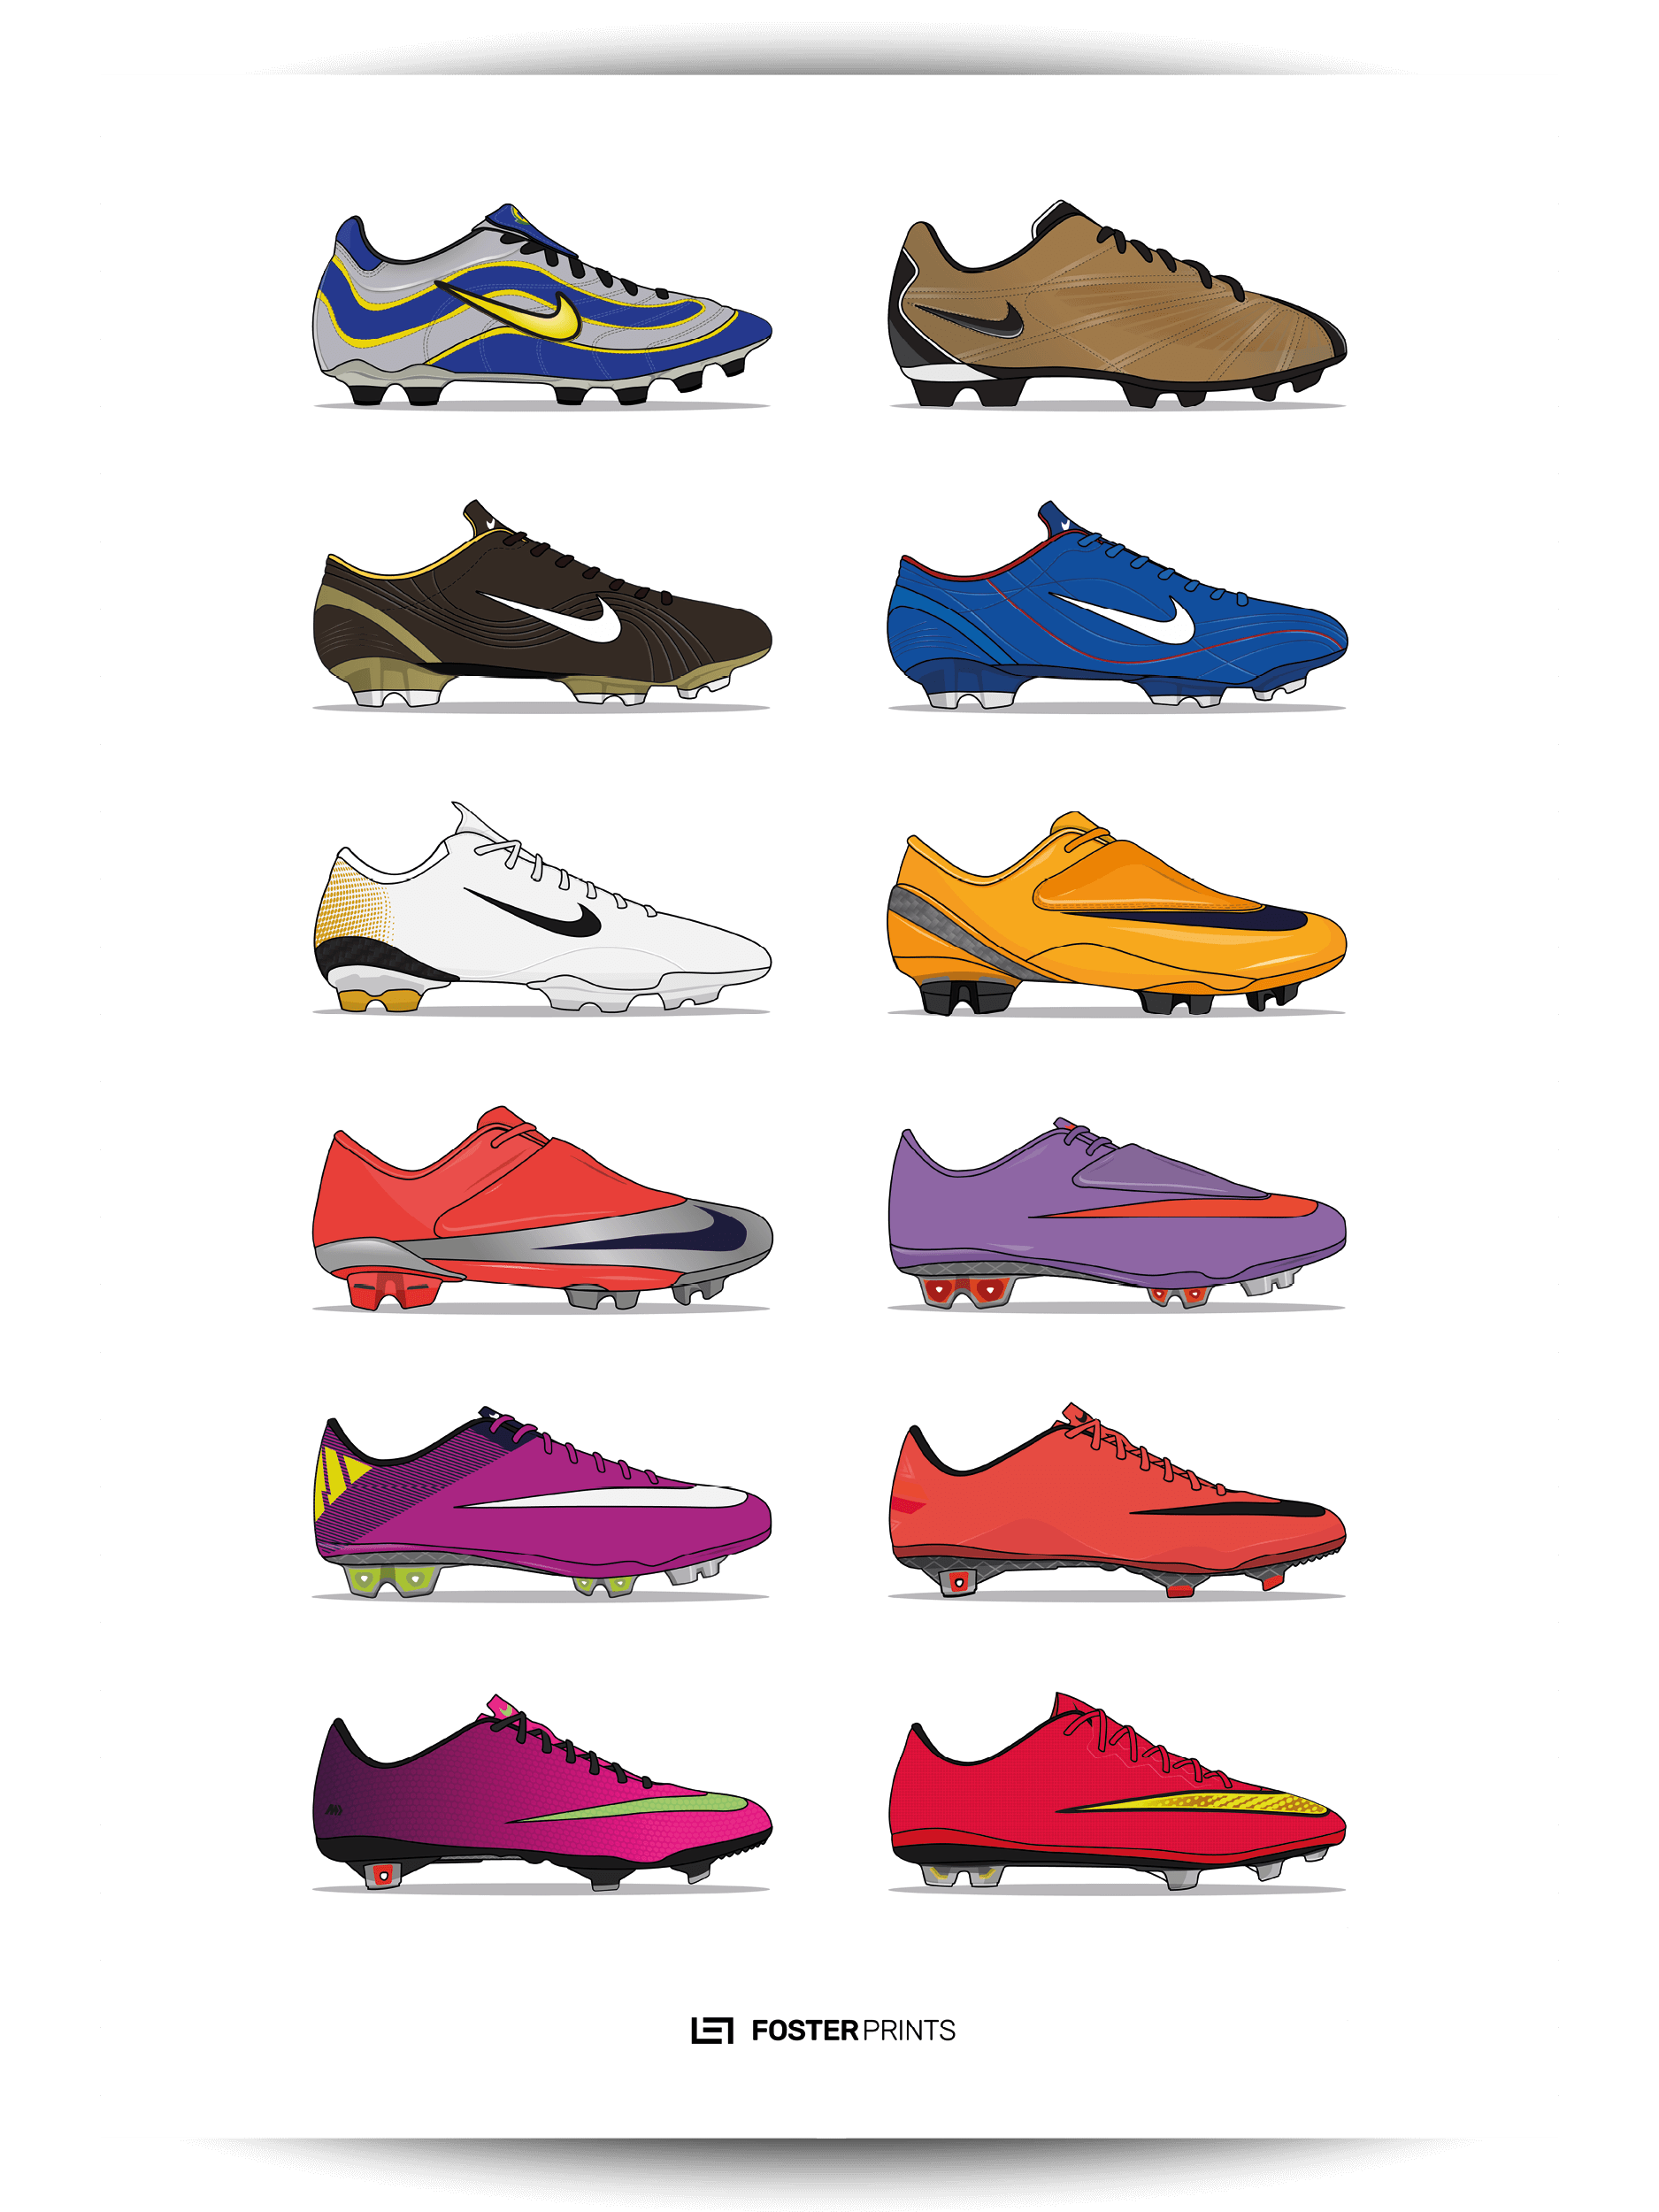 nike r9 boots 1998